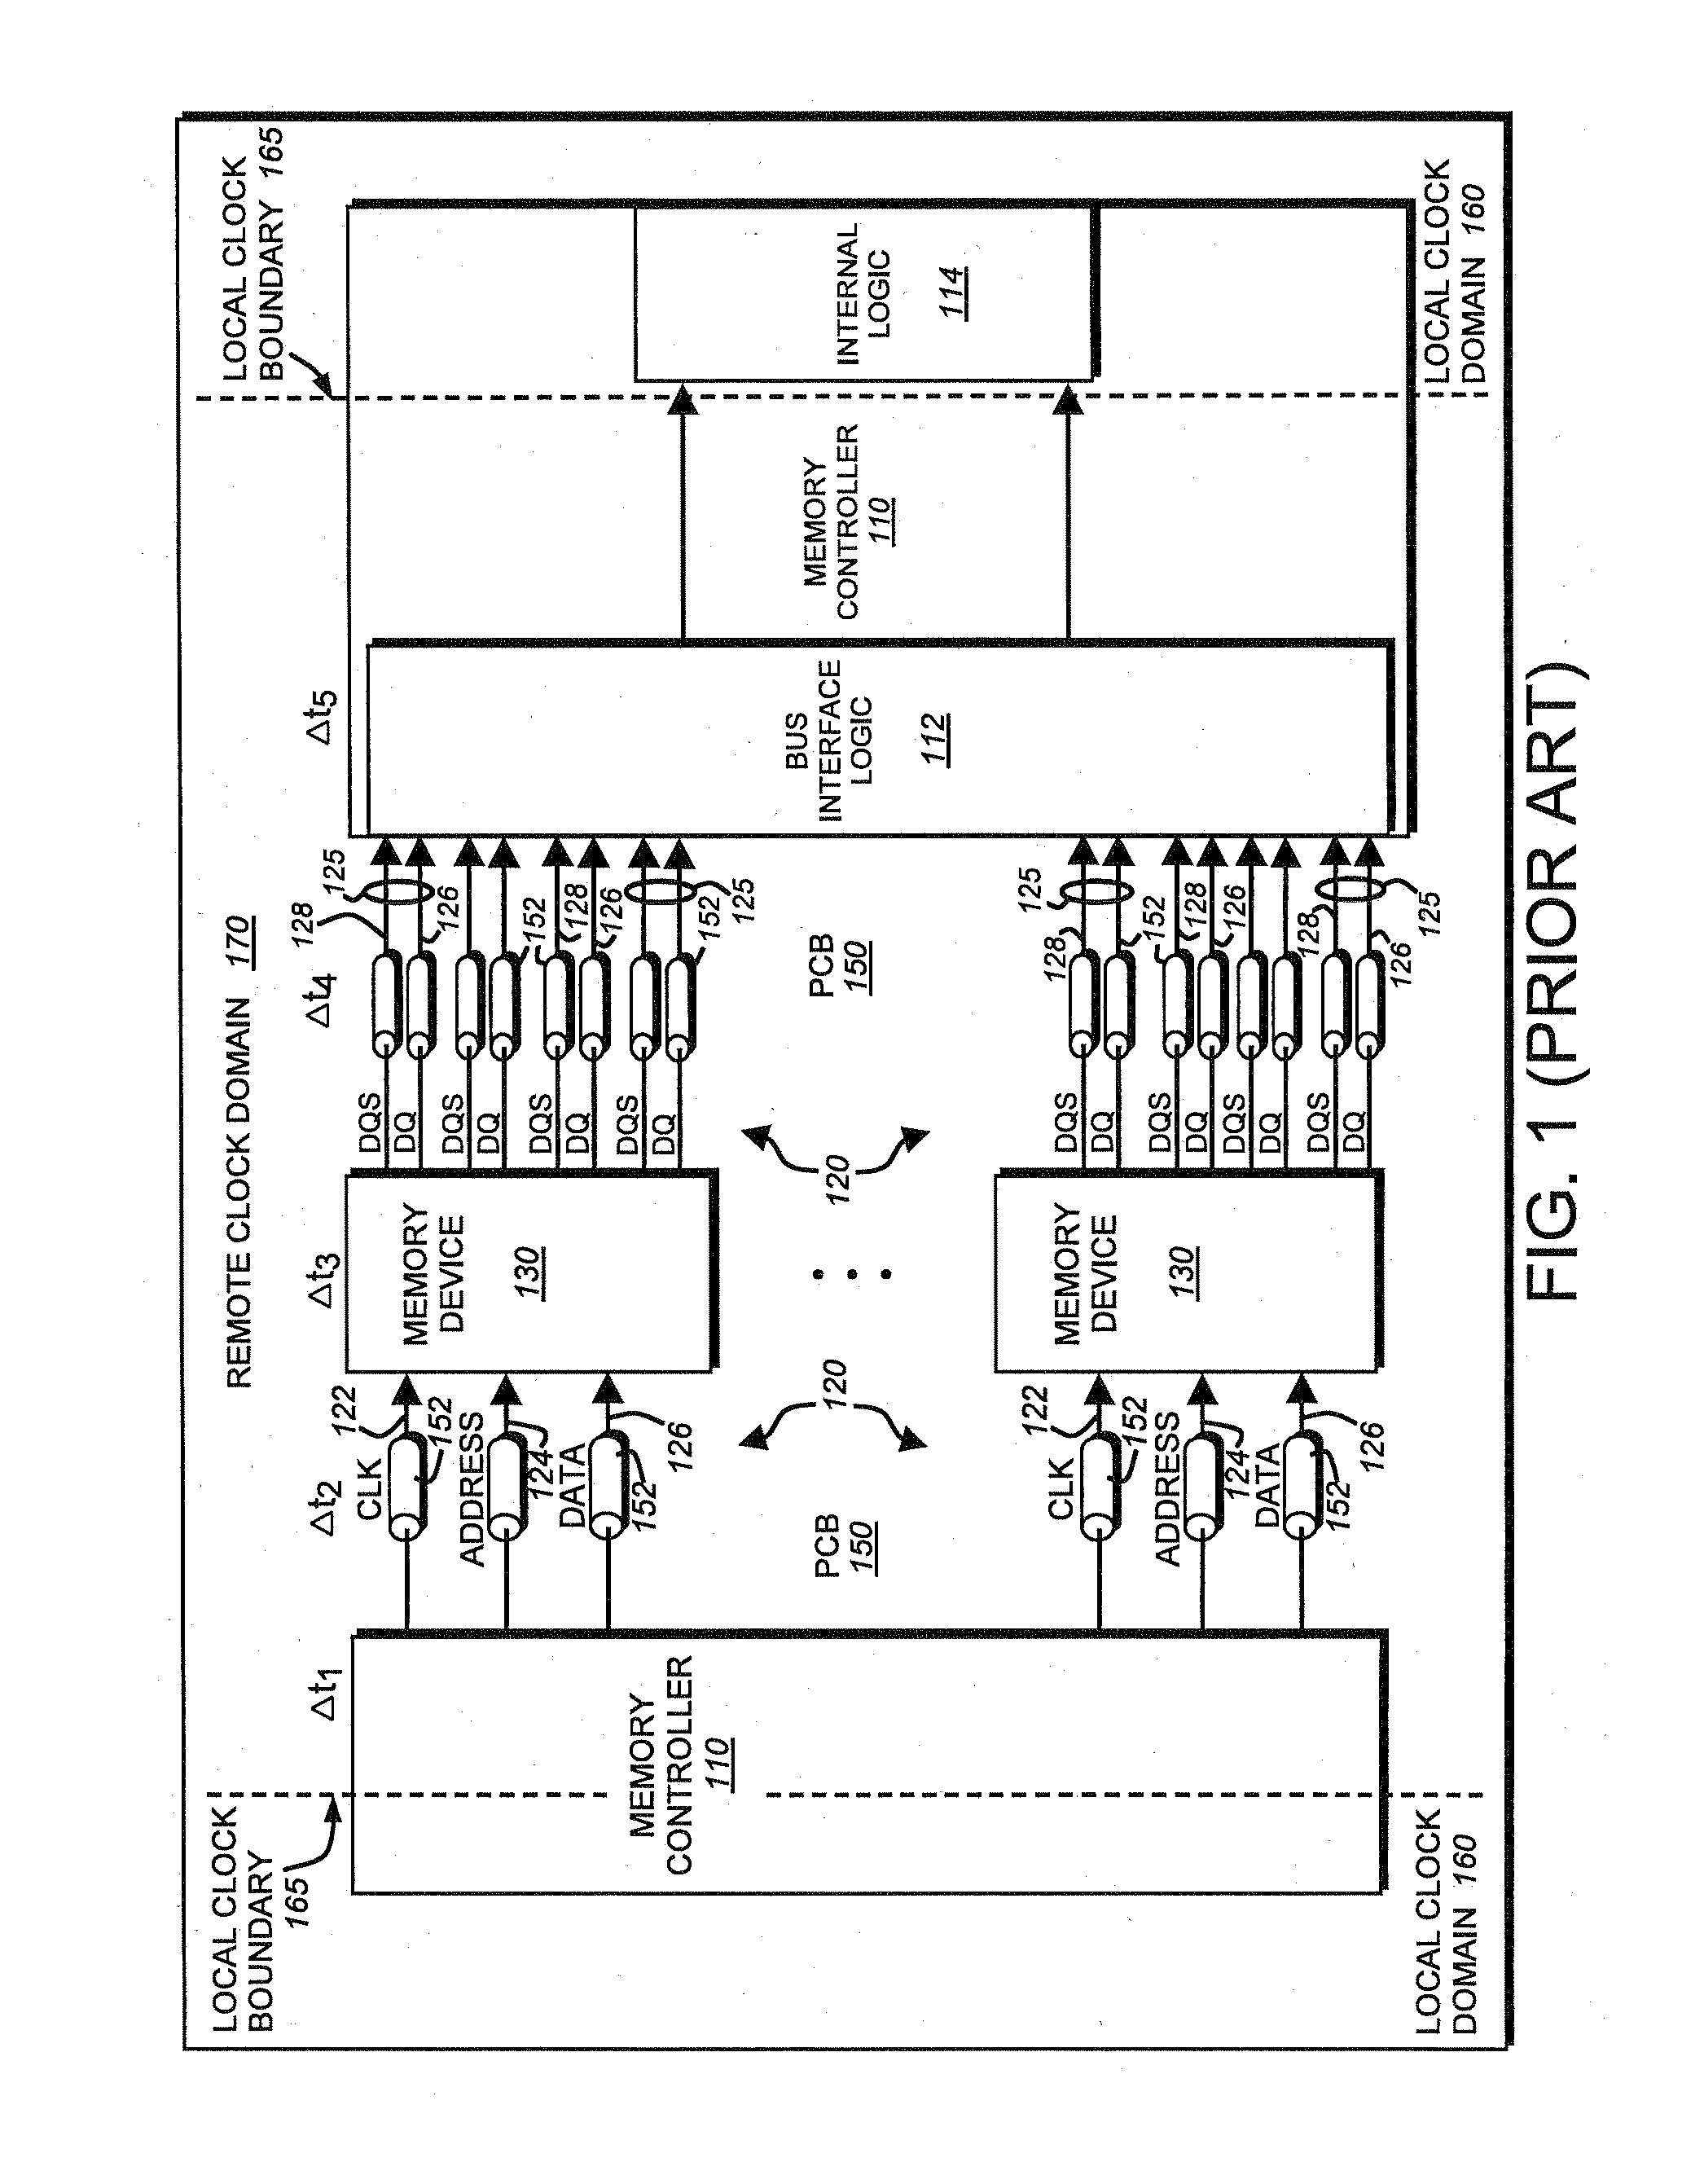 Synchronization technique for high speed memory subsystem